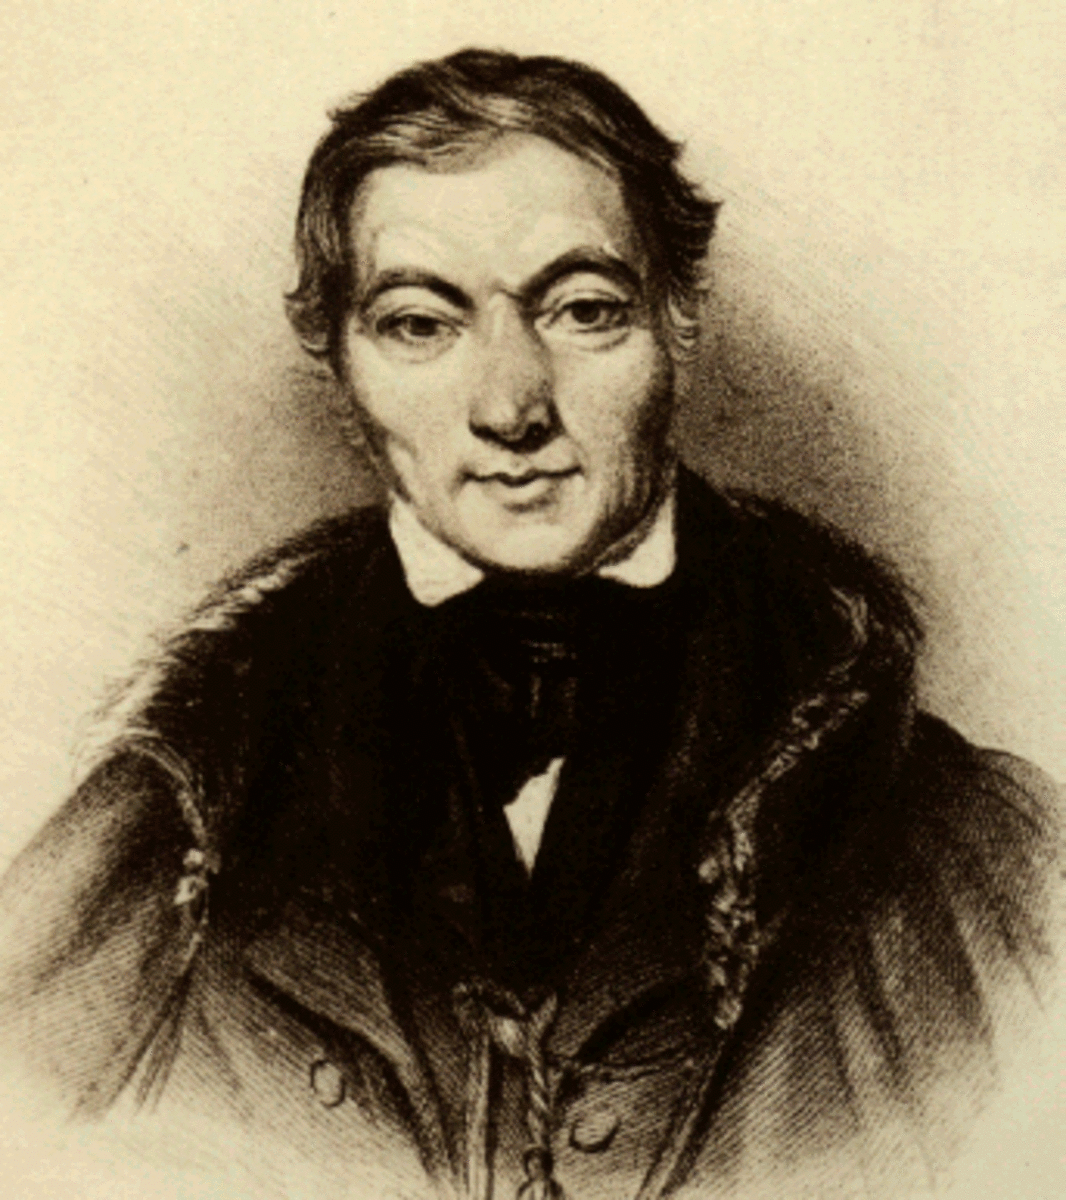 ROBERT OWEN IS ONE OF THE FOUNDERS OF SOCIALISM